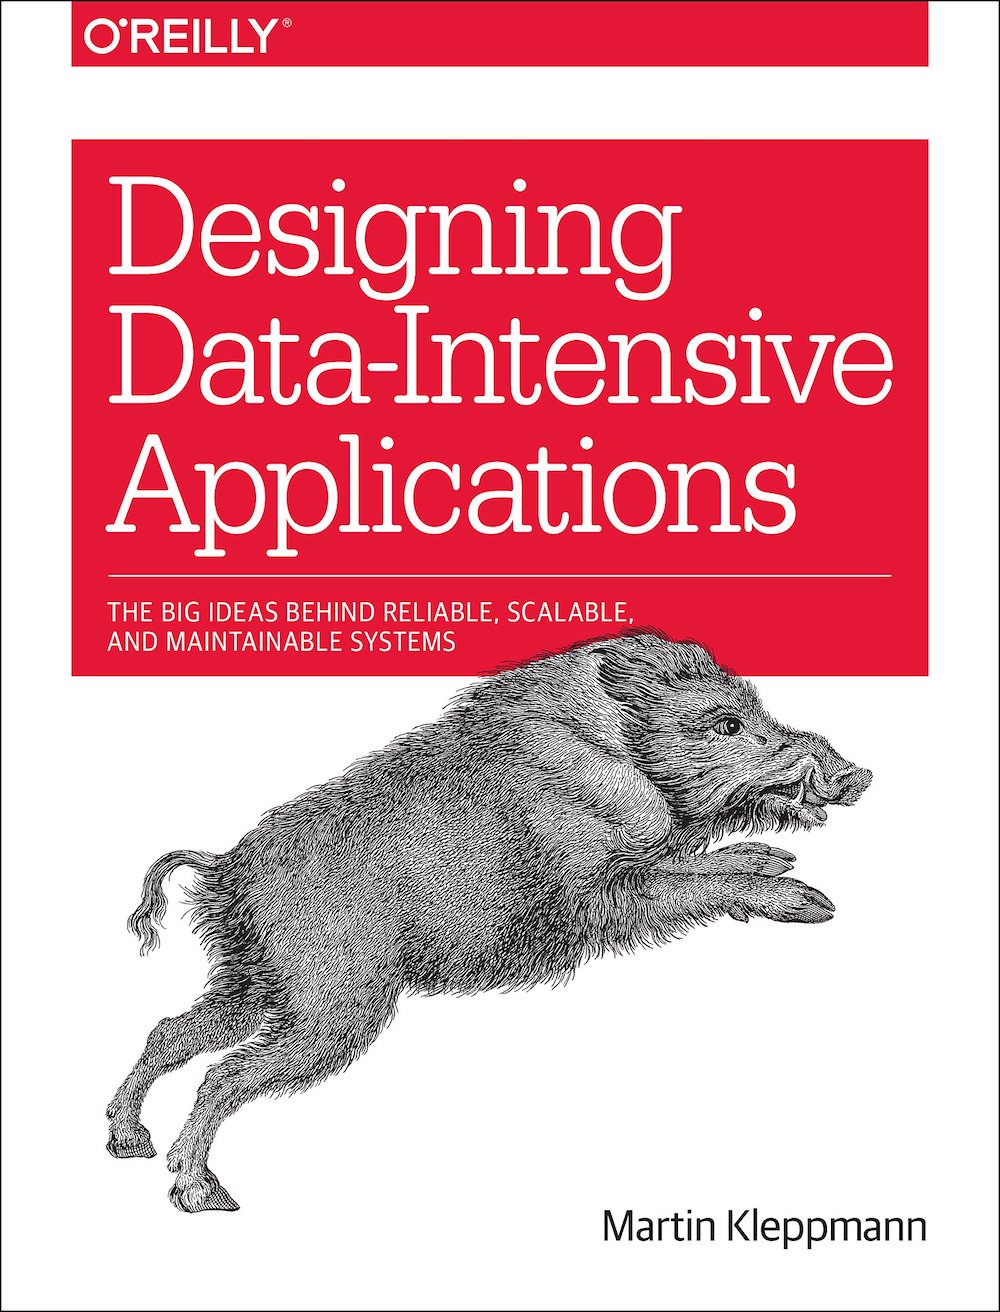 Designing Data-Intensive Applications - Chapter 10 - Batch Processing